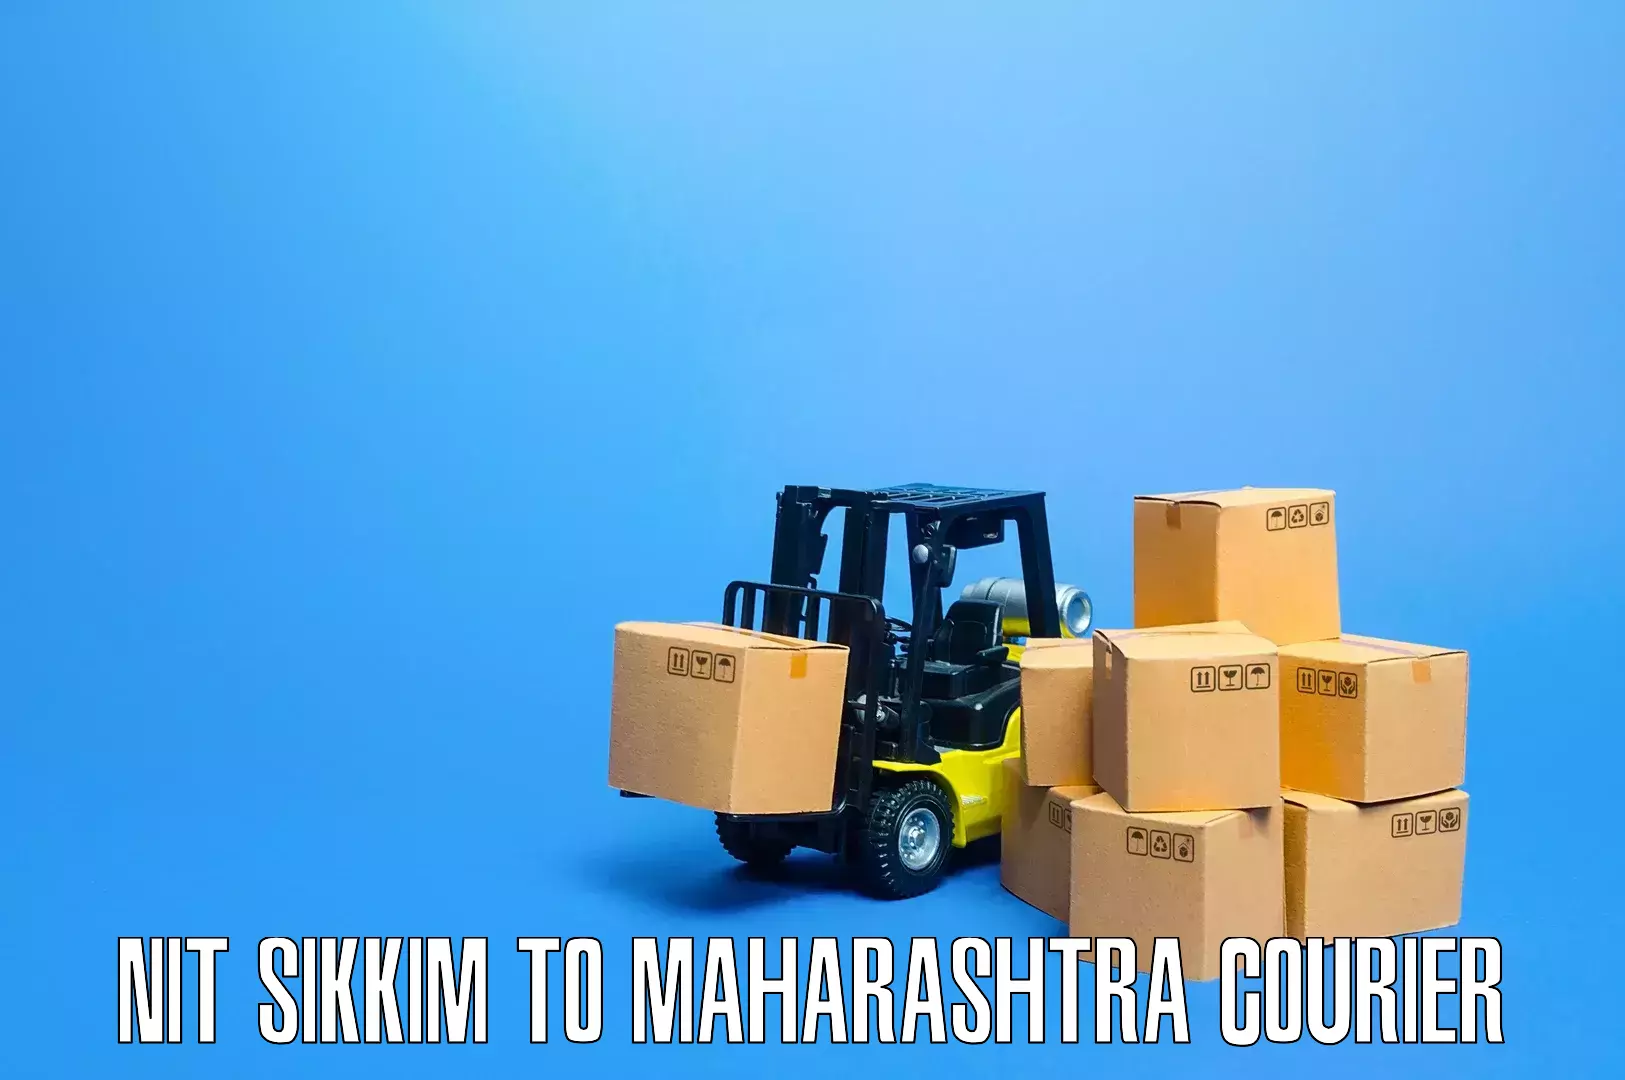 Home moving specialists NIT Sikkim to Maharashtra